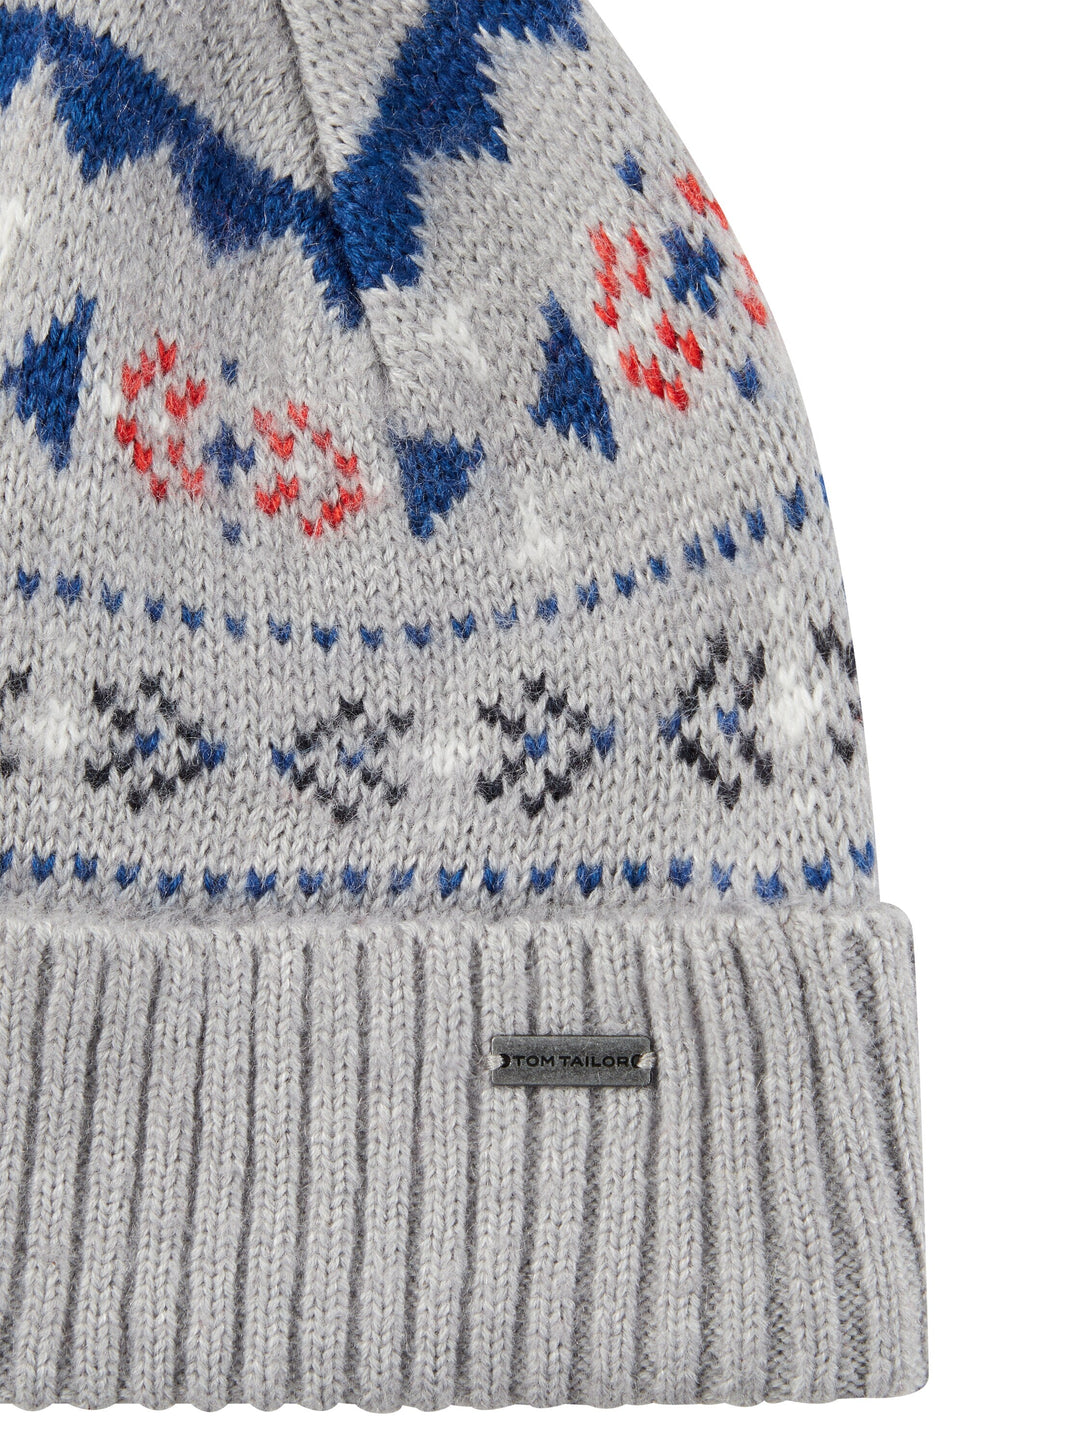 JACQUARD KNITTED HAT